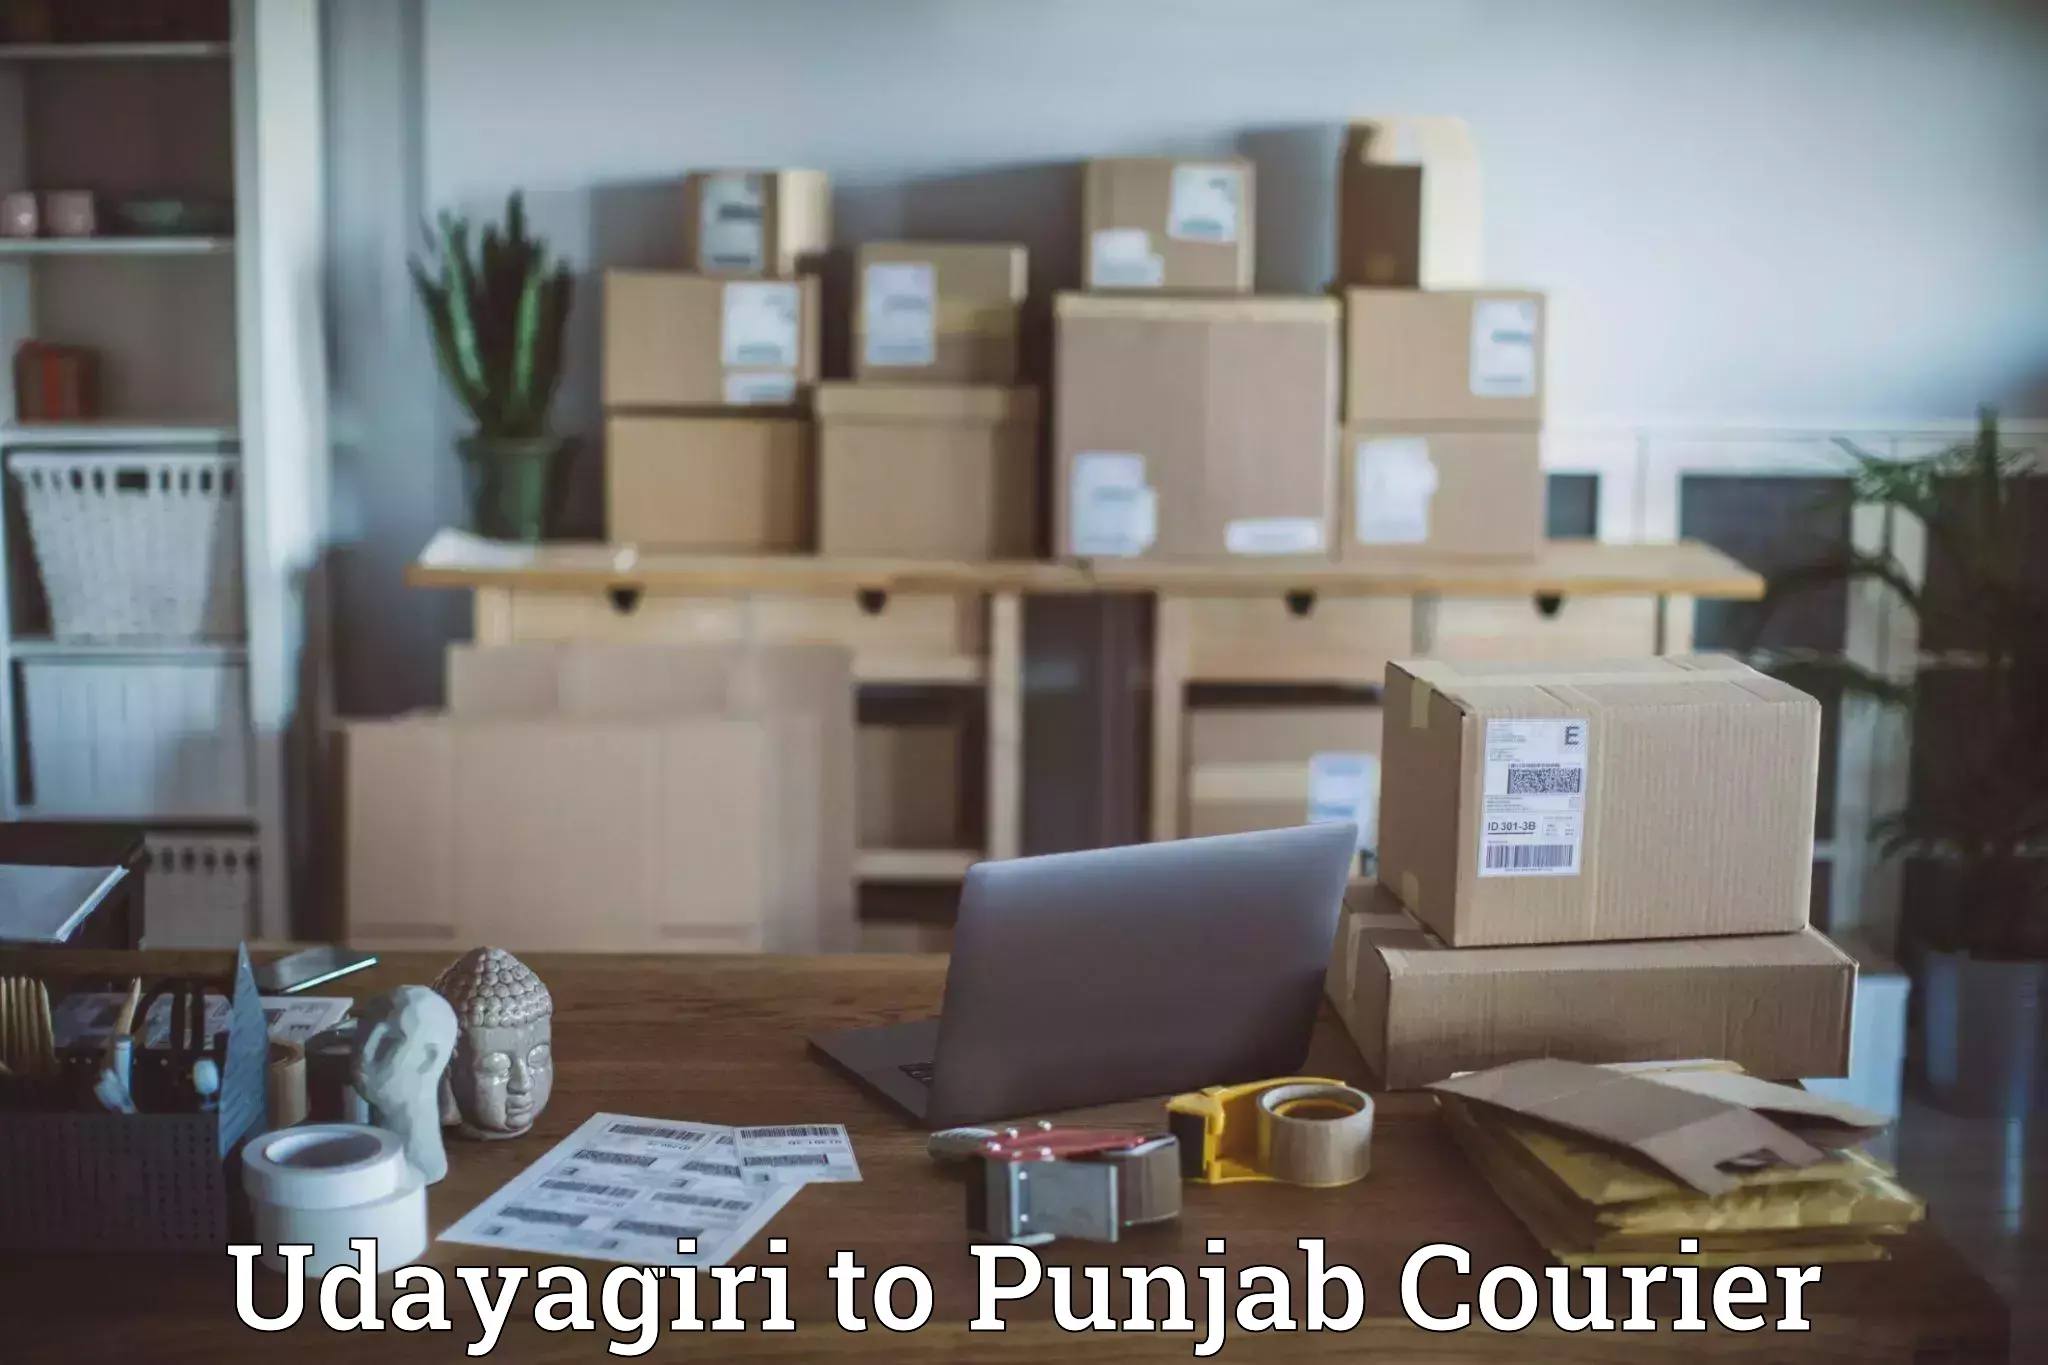 Flexible delivery scheduling in Udayagiri to Amritsar